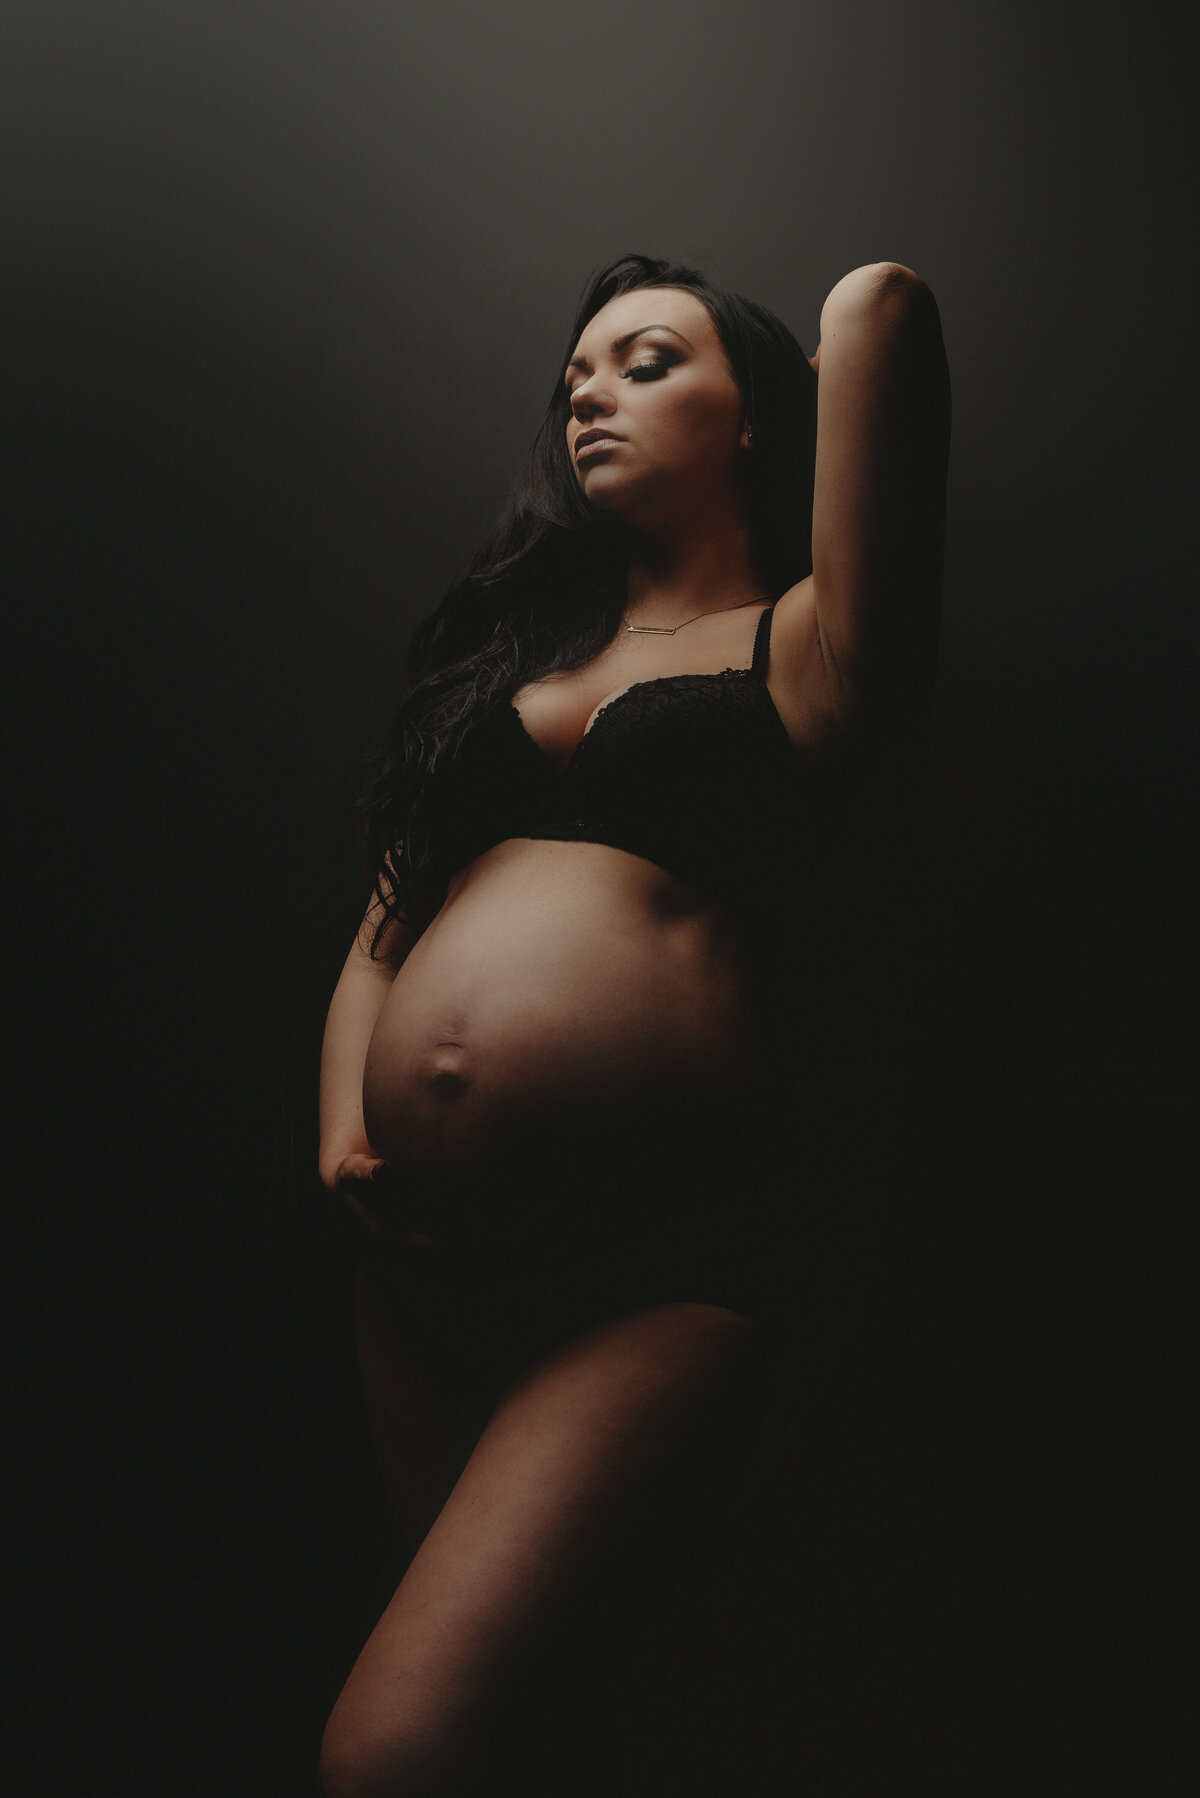 Pregnant lady wearing black bra and panties posed standing up showing off tummy